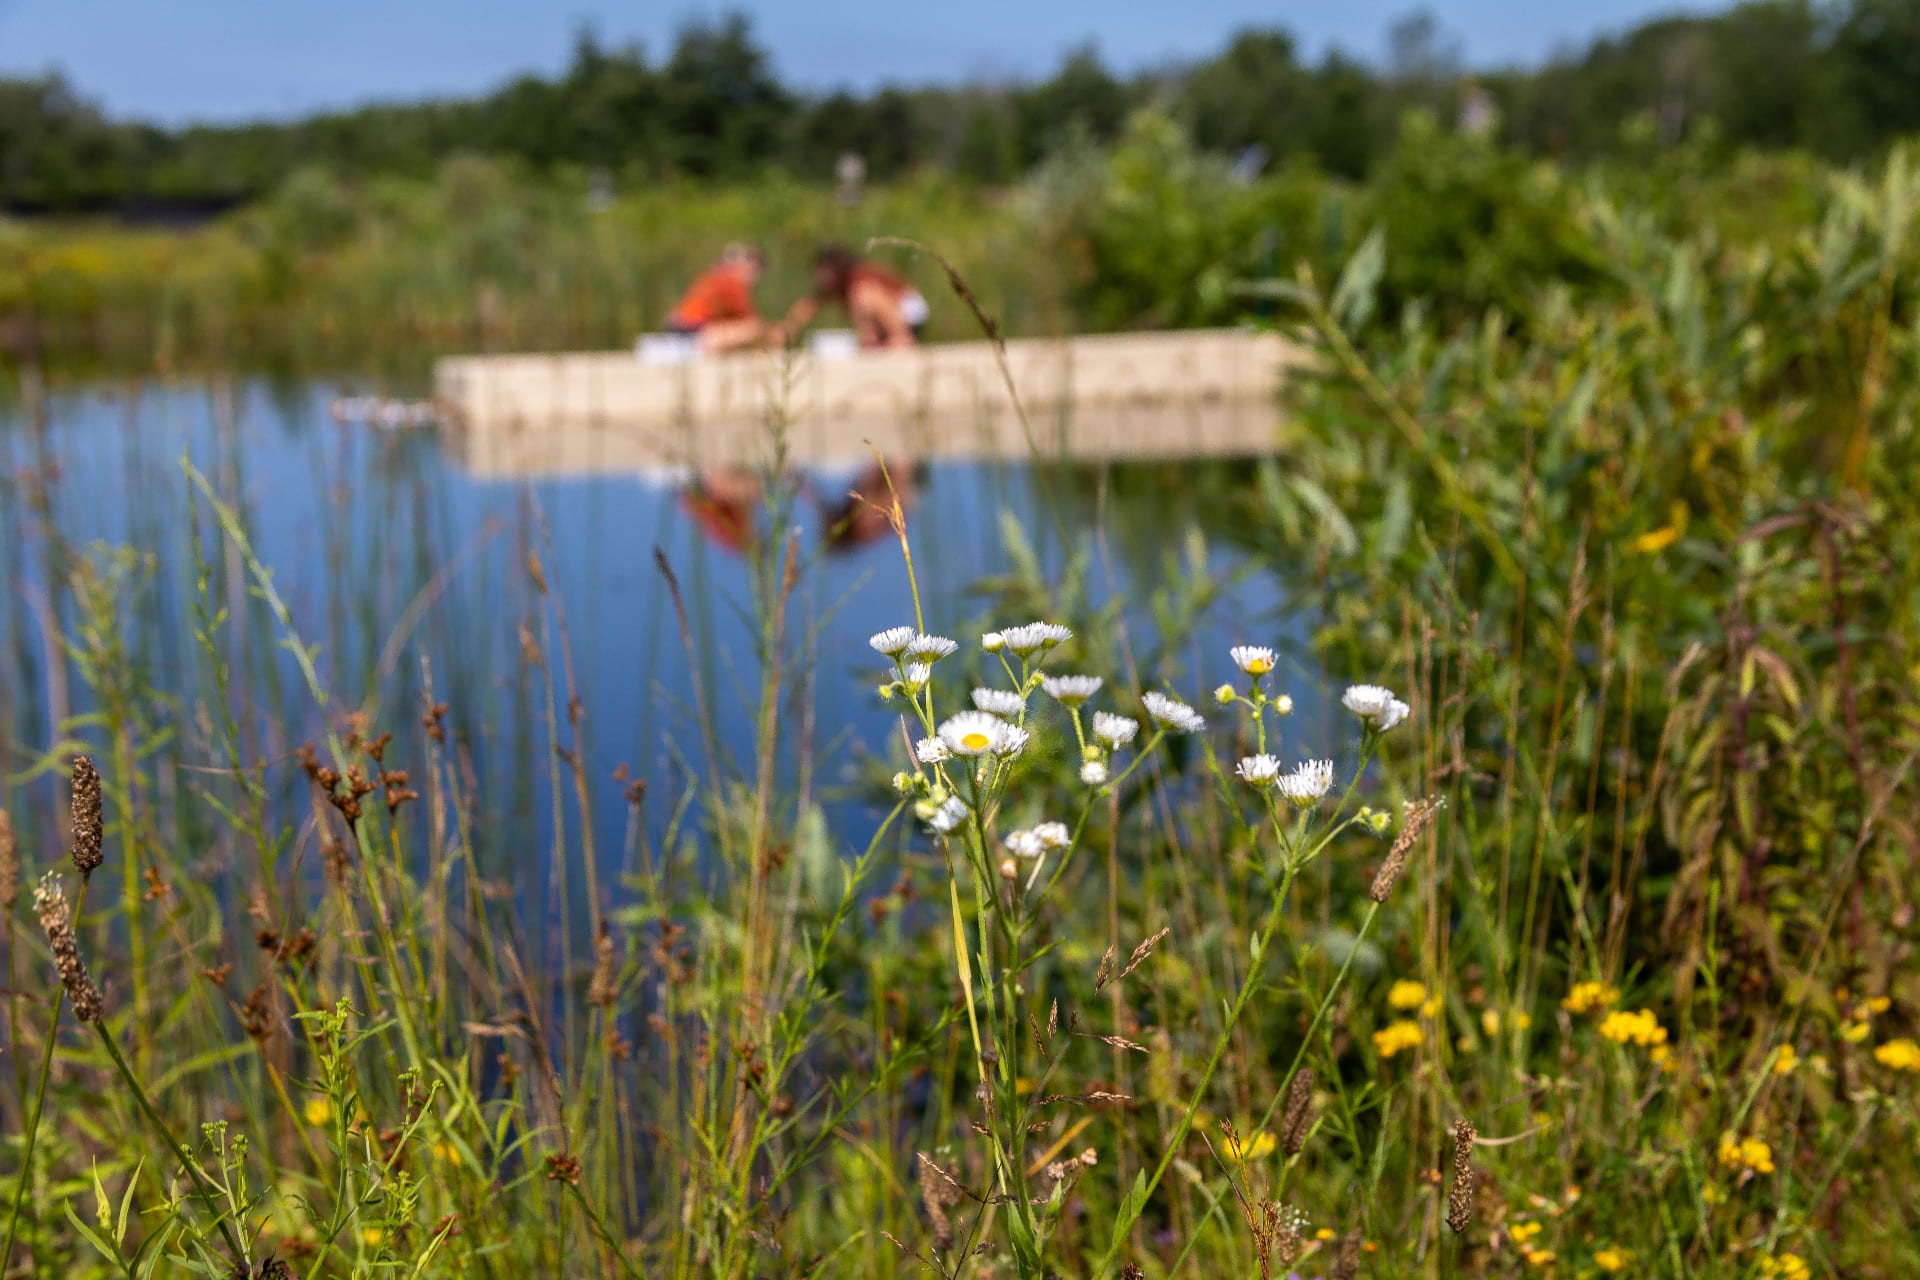 Flowers in the foreground with students on a dock in the background.